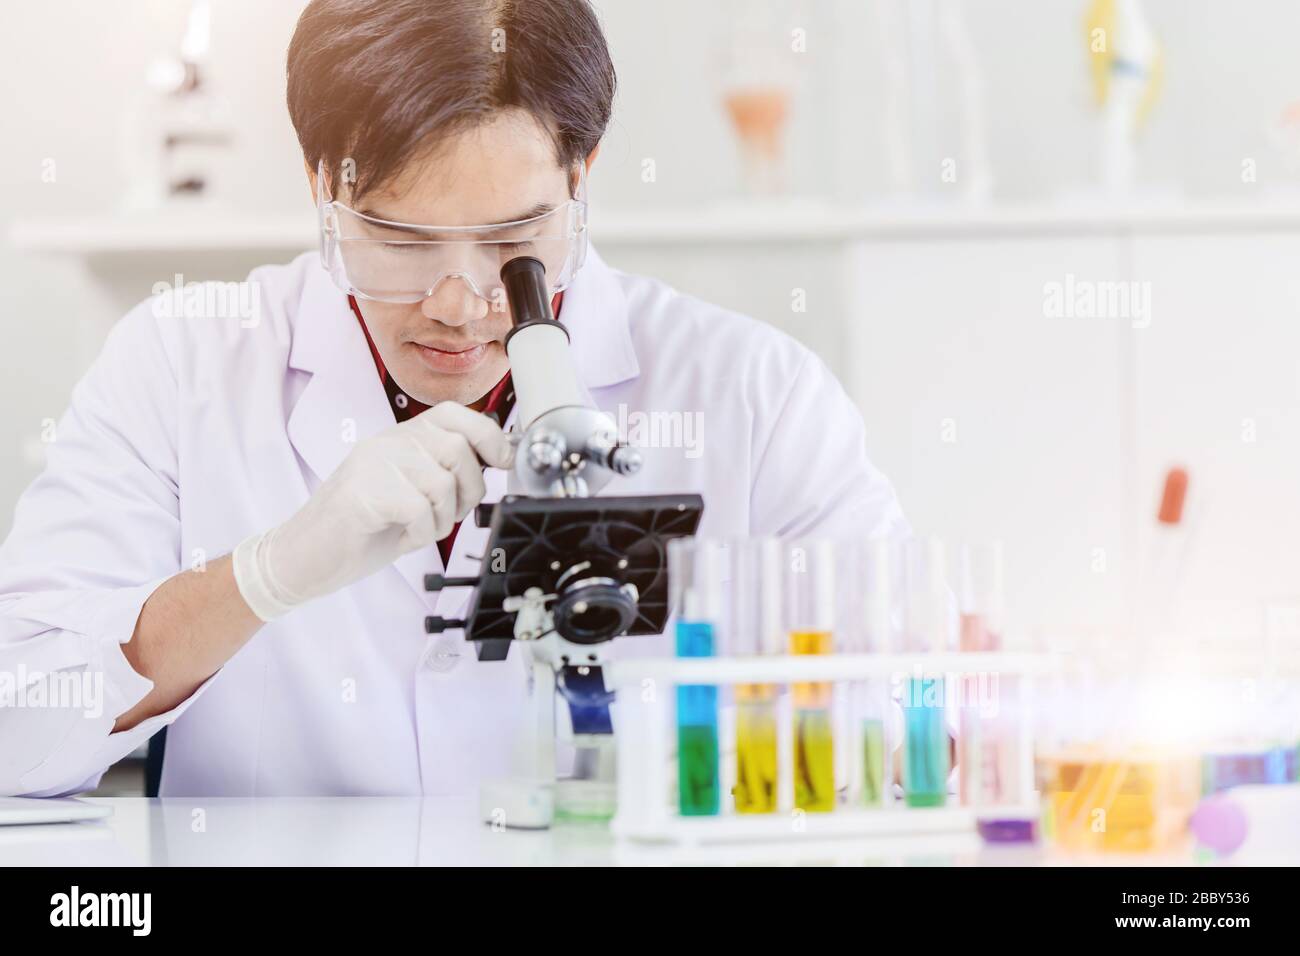 Asian Scientist Doctor working in medical healthcare lab for science medicine research looking at microscope Stock Photo